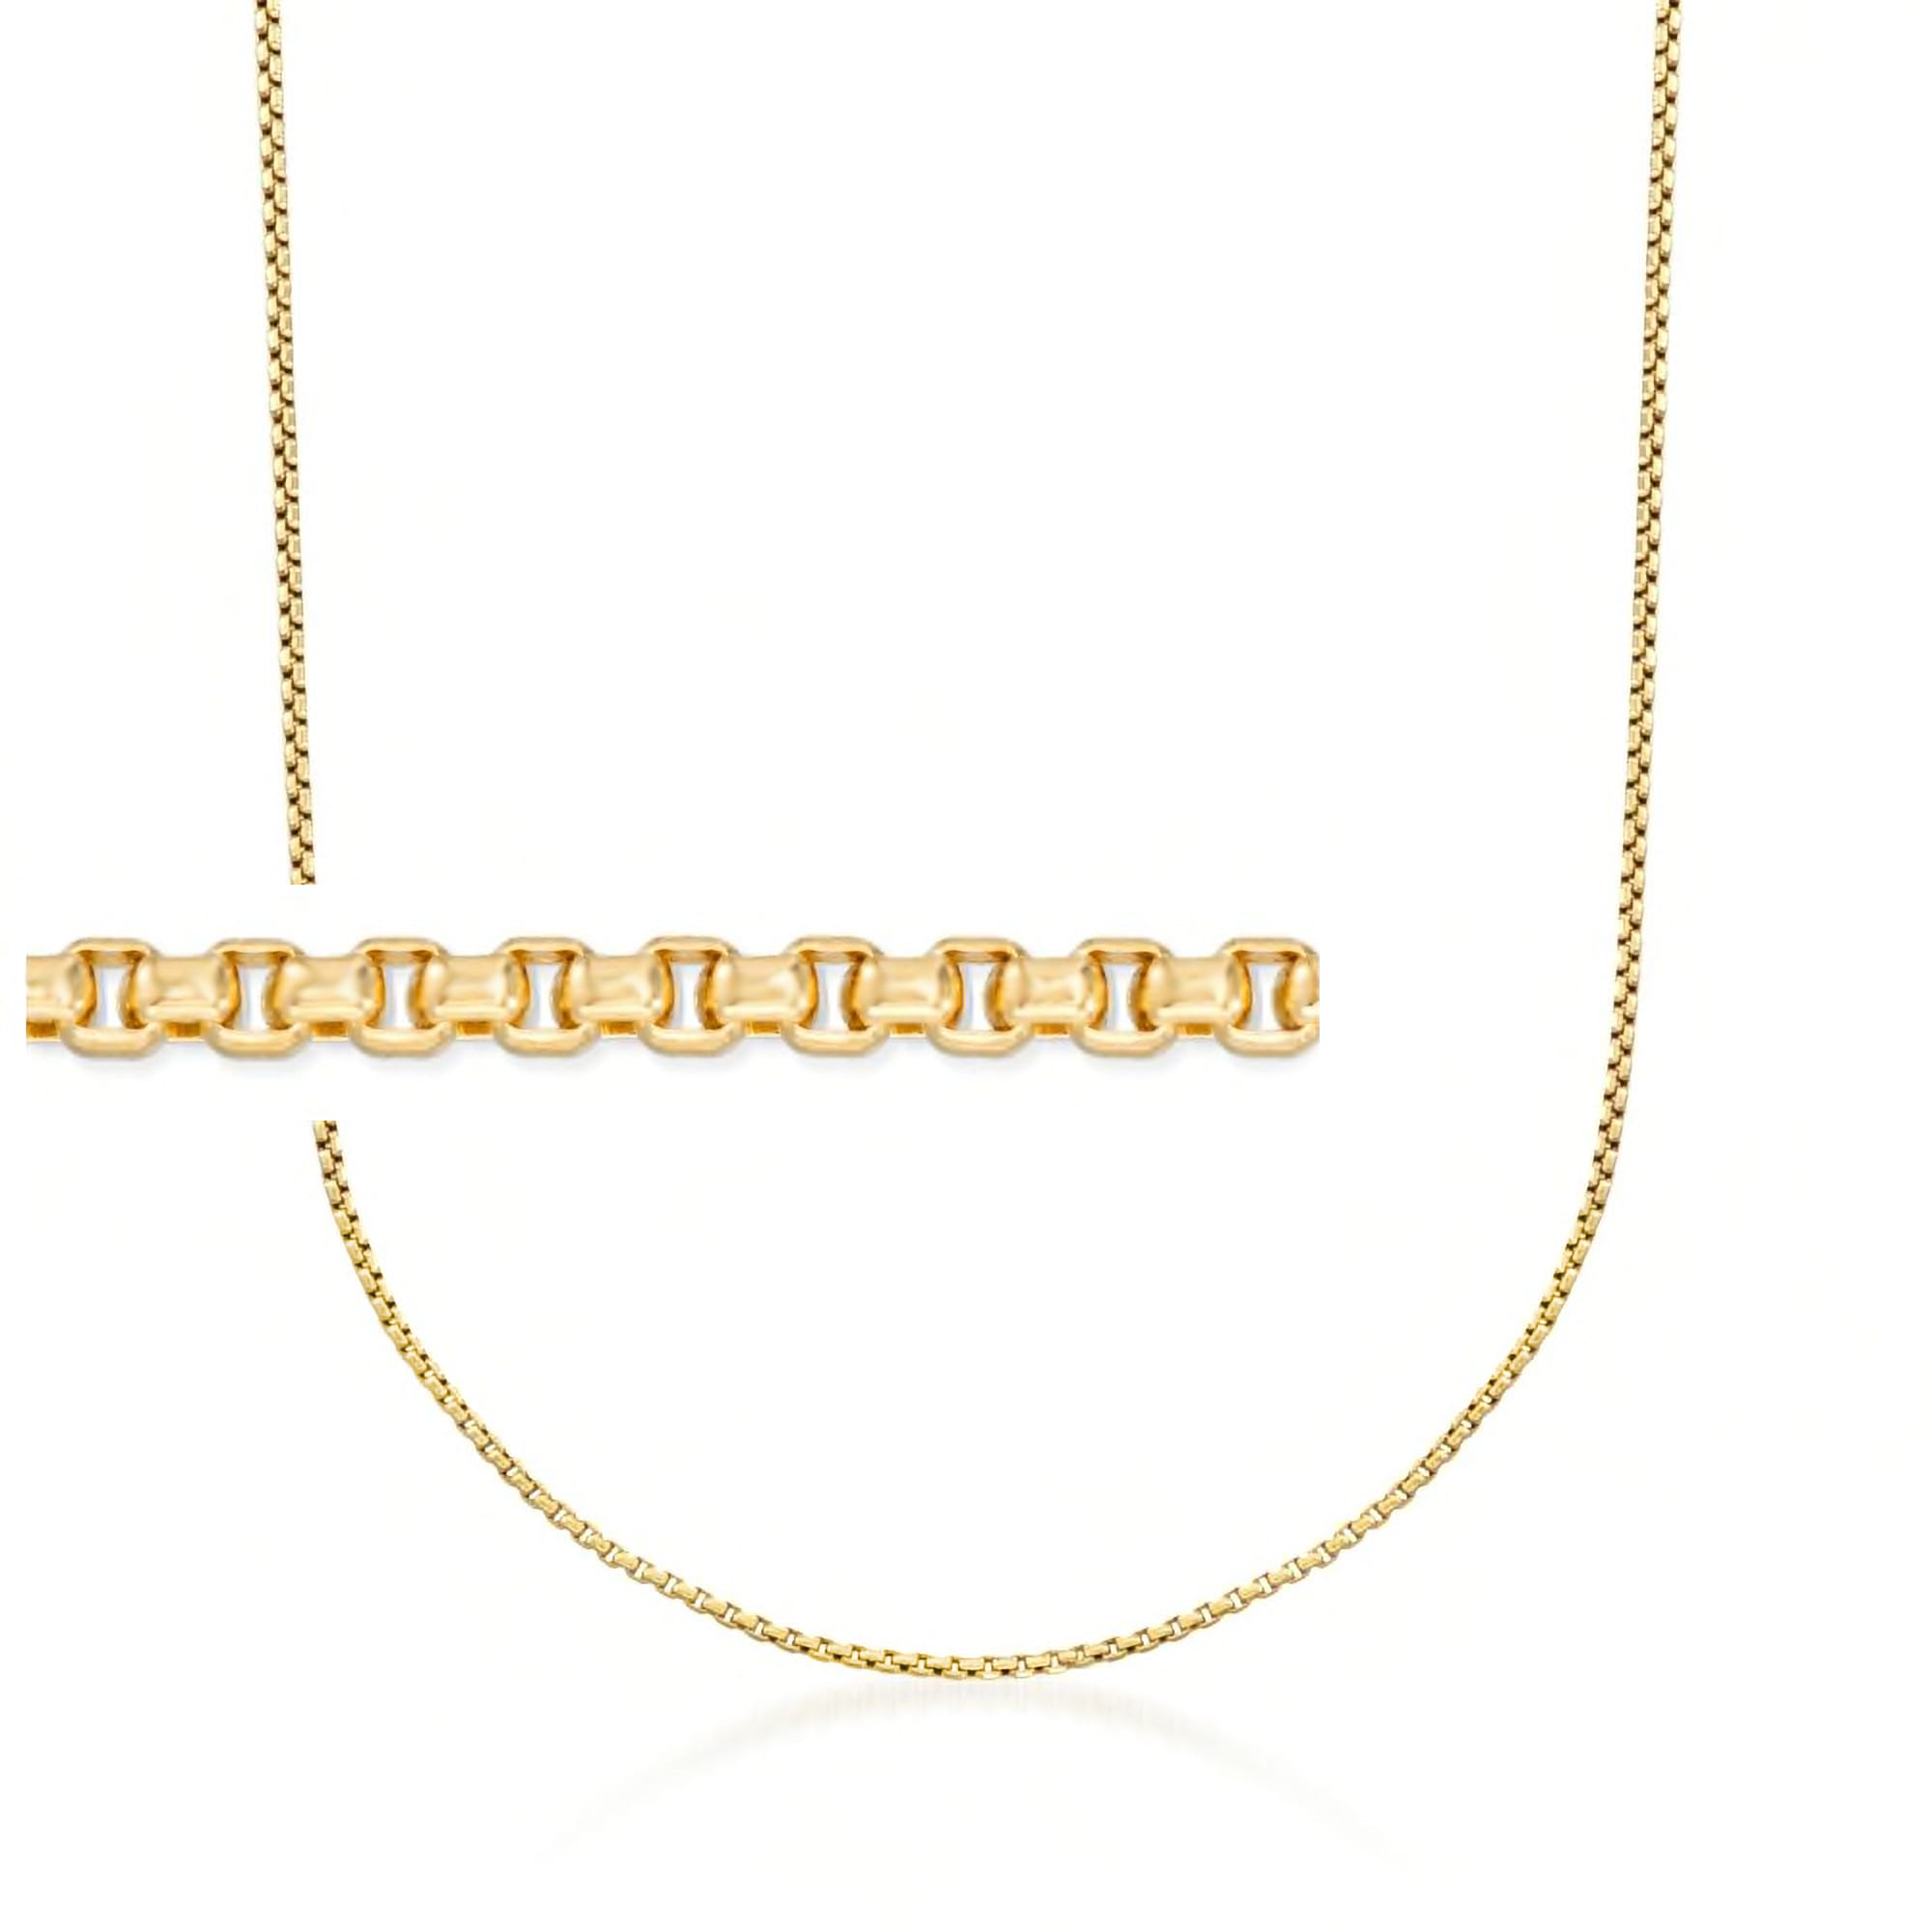 1.7mm 14kt Yellow Gold Rounded Box-Chain Necklace | Ross-Simons